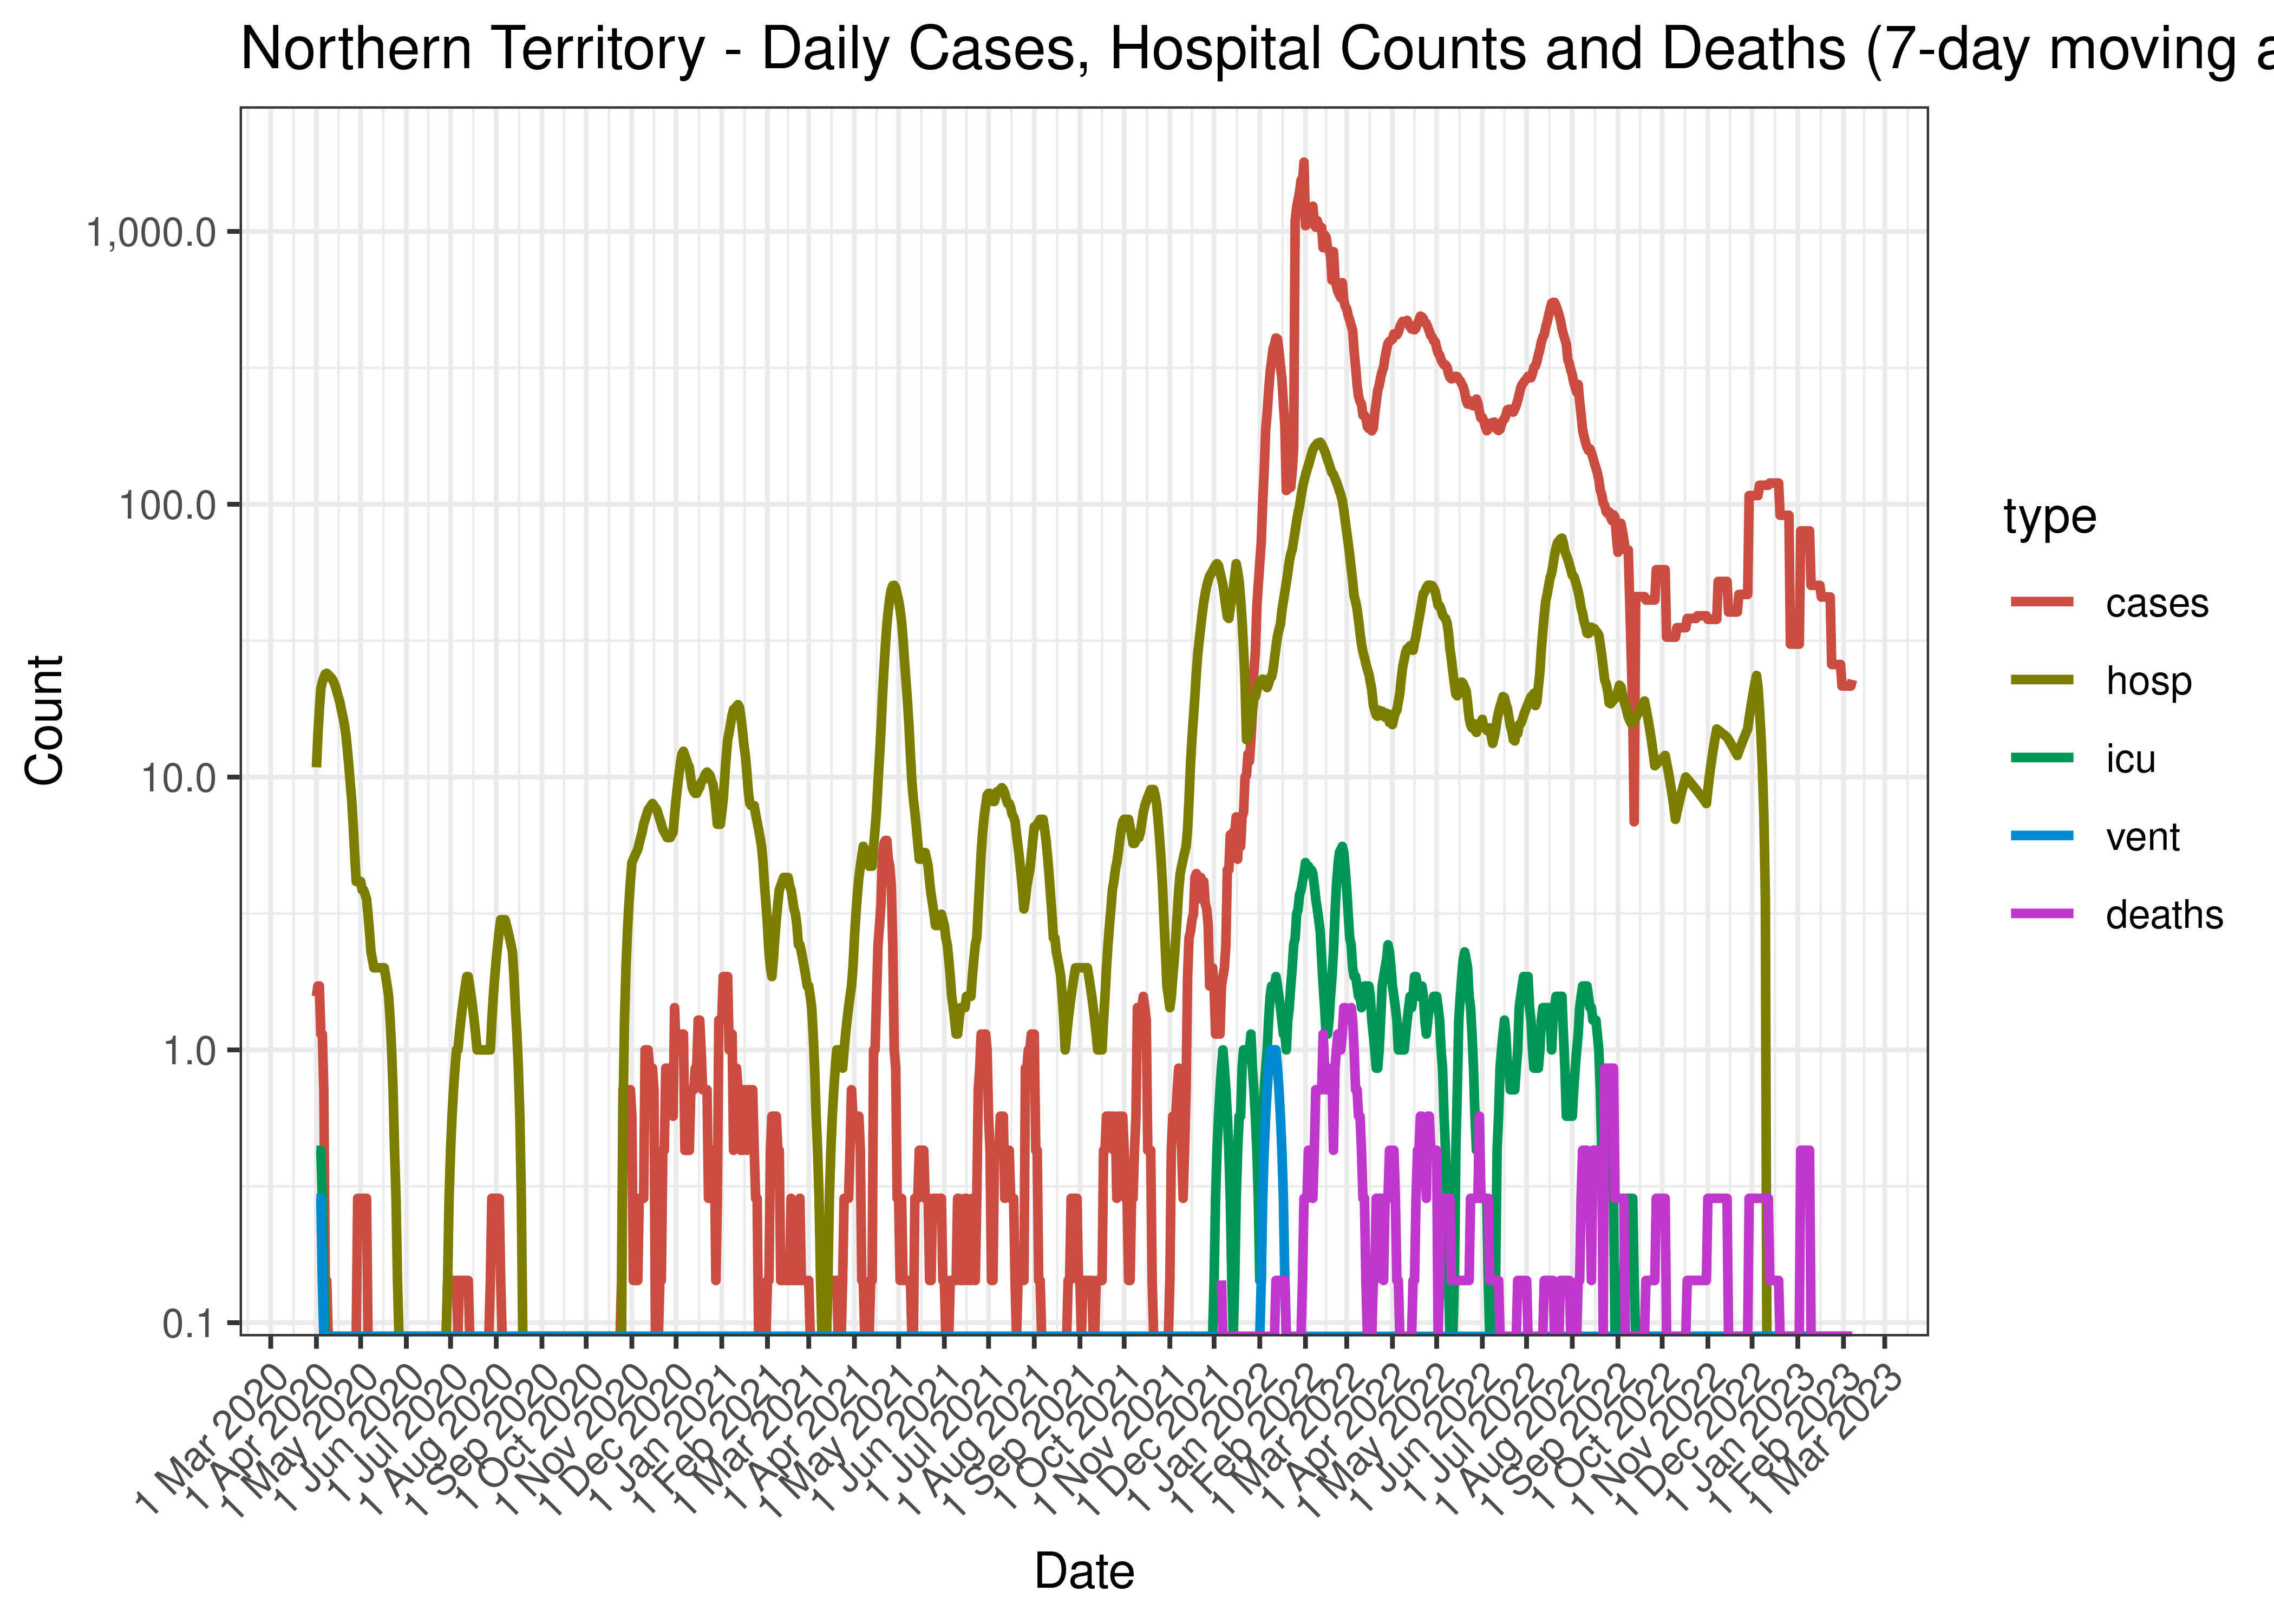 Northern Territory - Daily Cases, Hospital Counts and Deaths (7-day moving average)